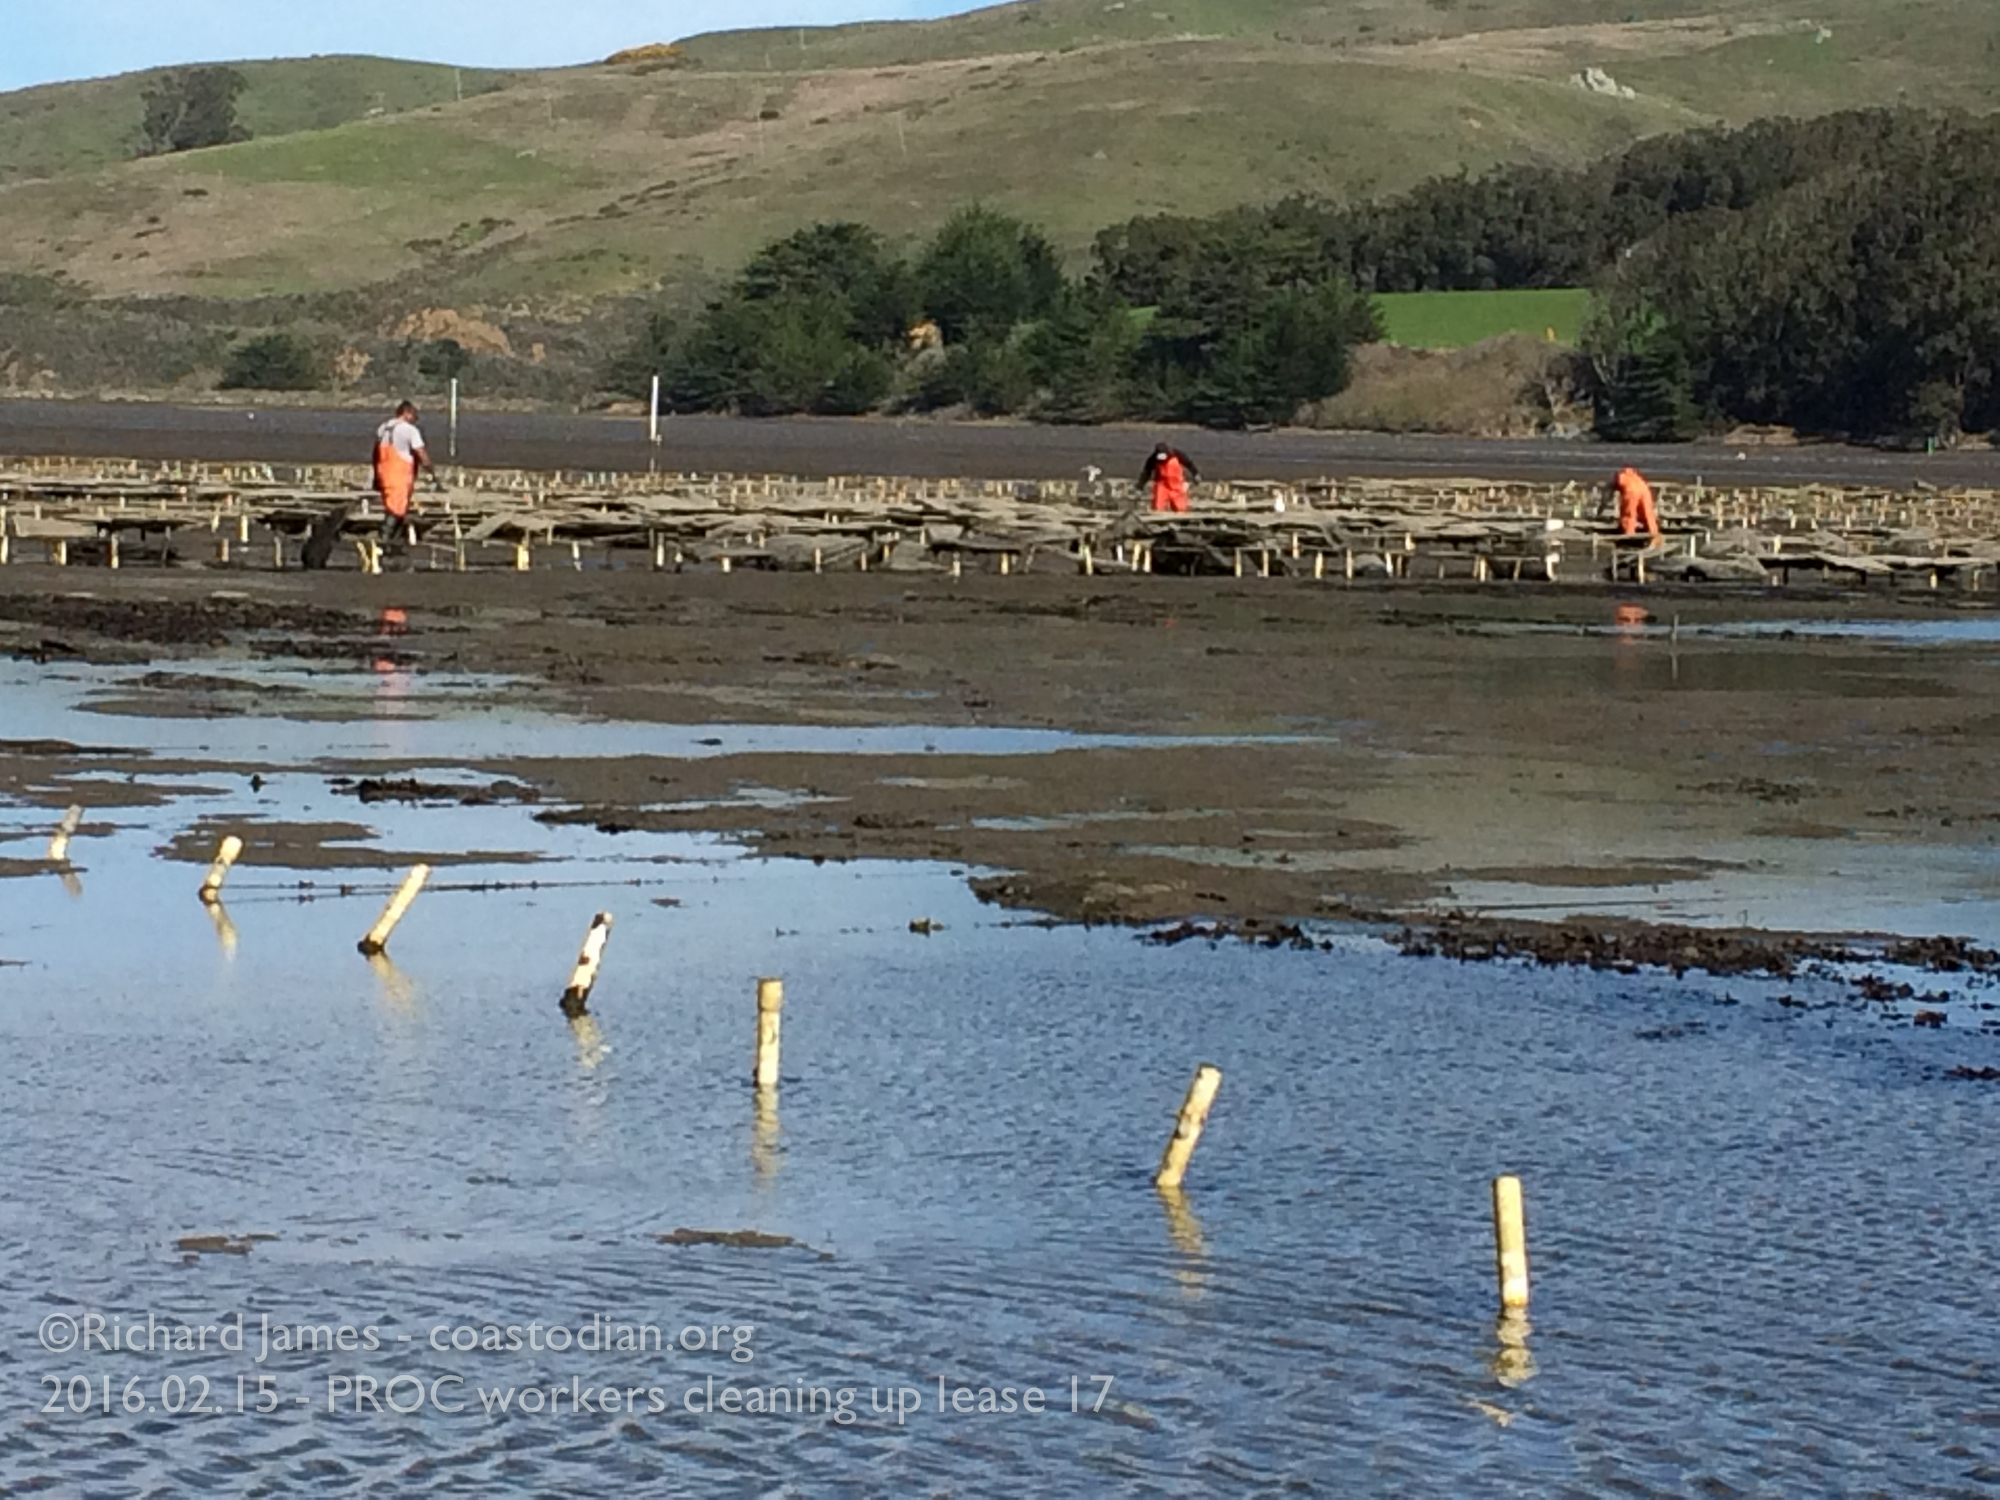 PROC workers undoing years of neglect in Tomales Bay at Walker Creek. ©Richard James - coastodian.org